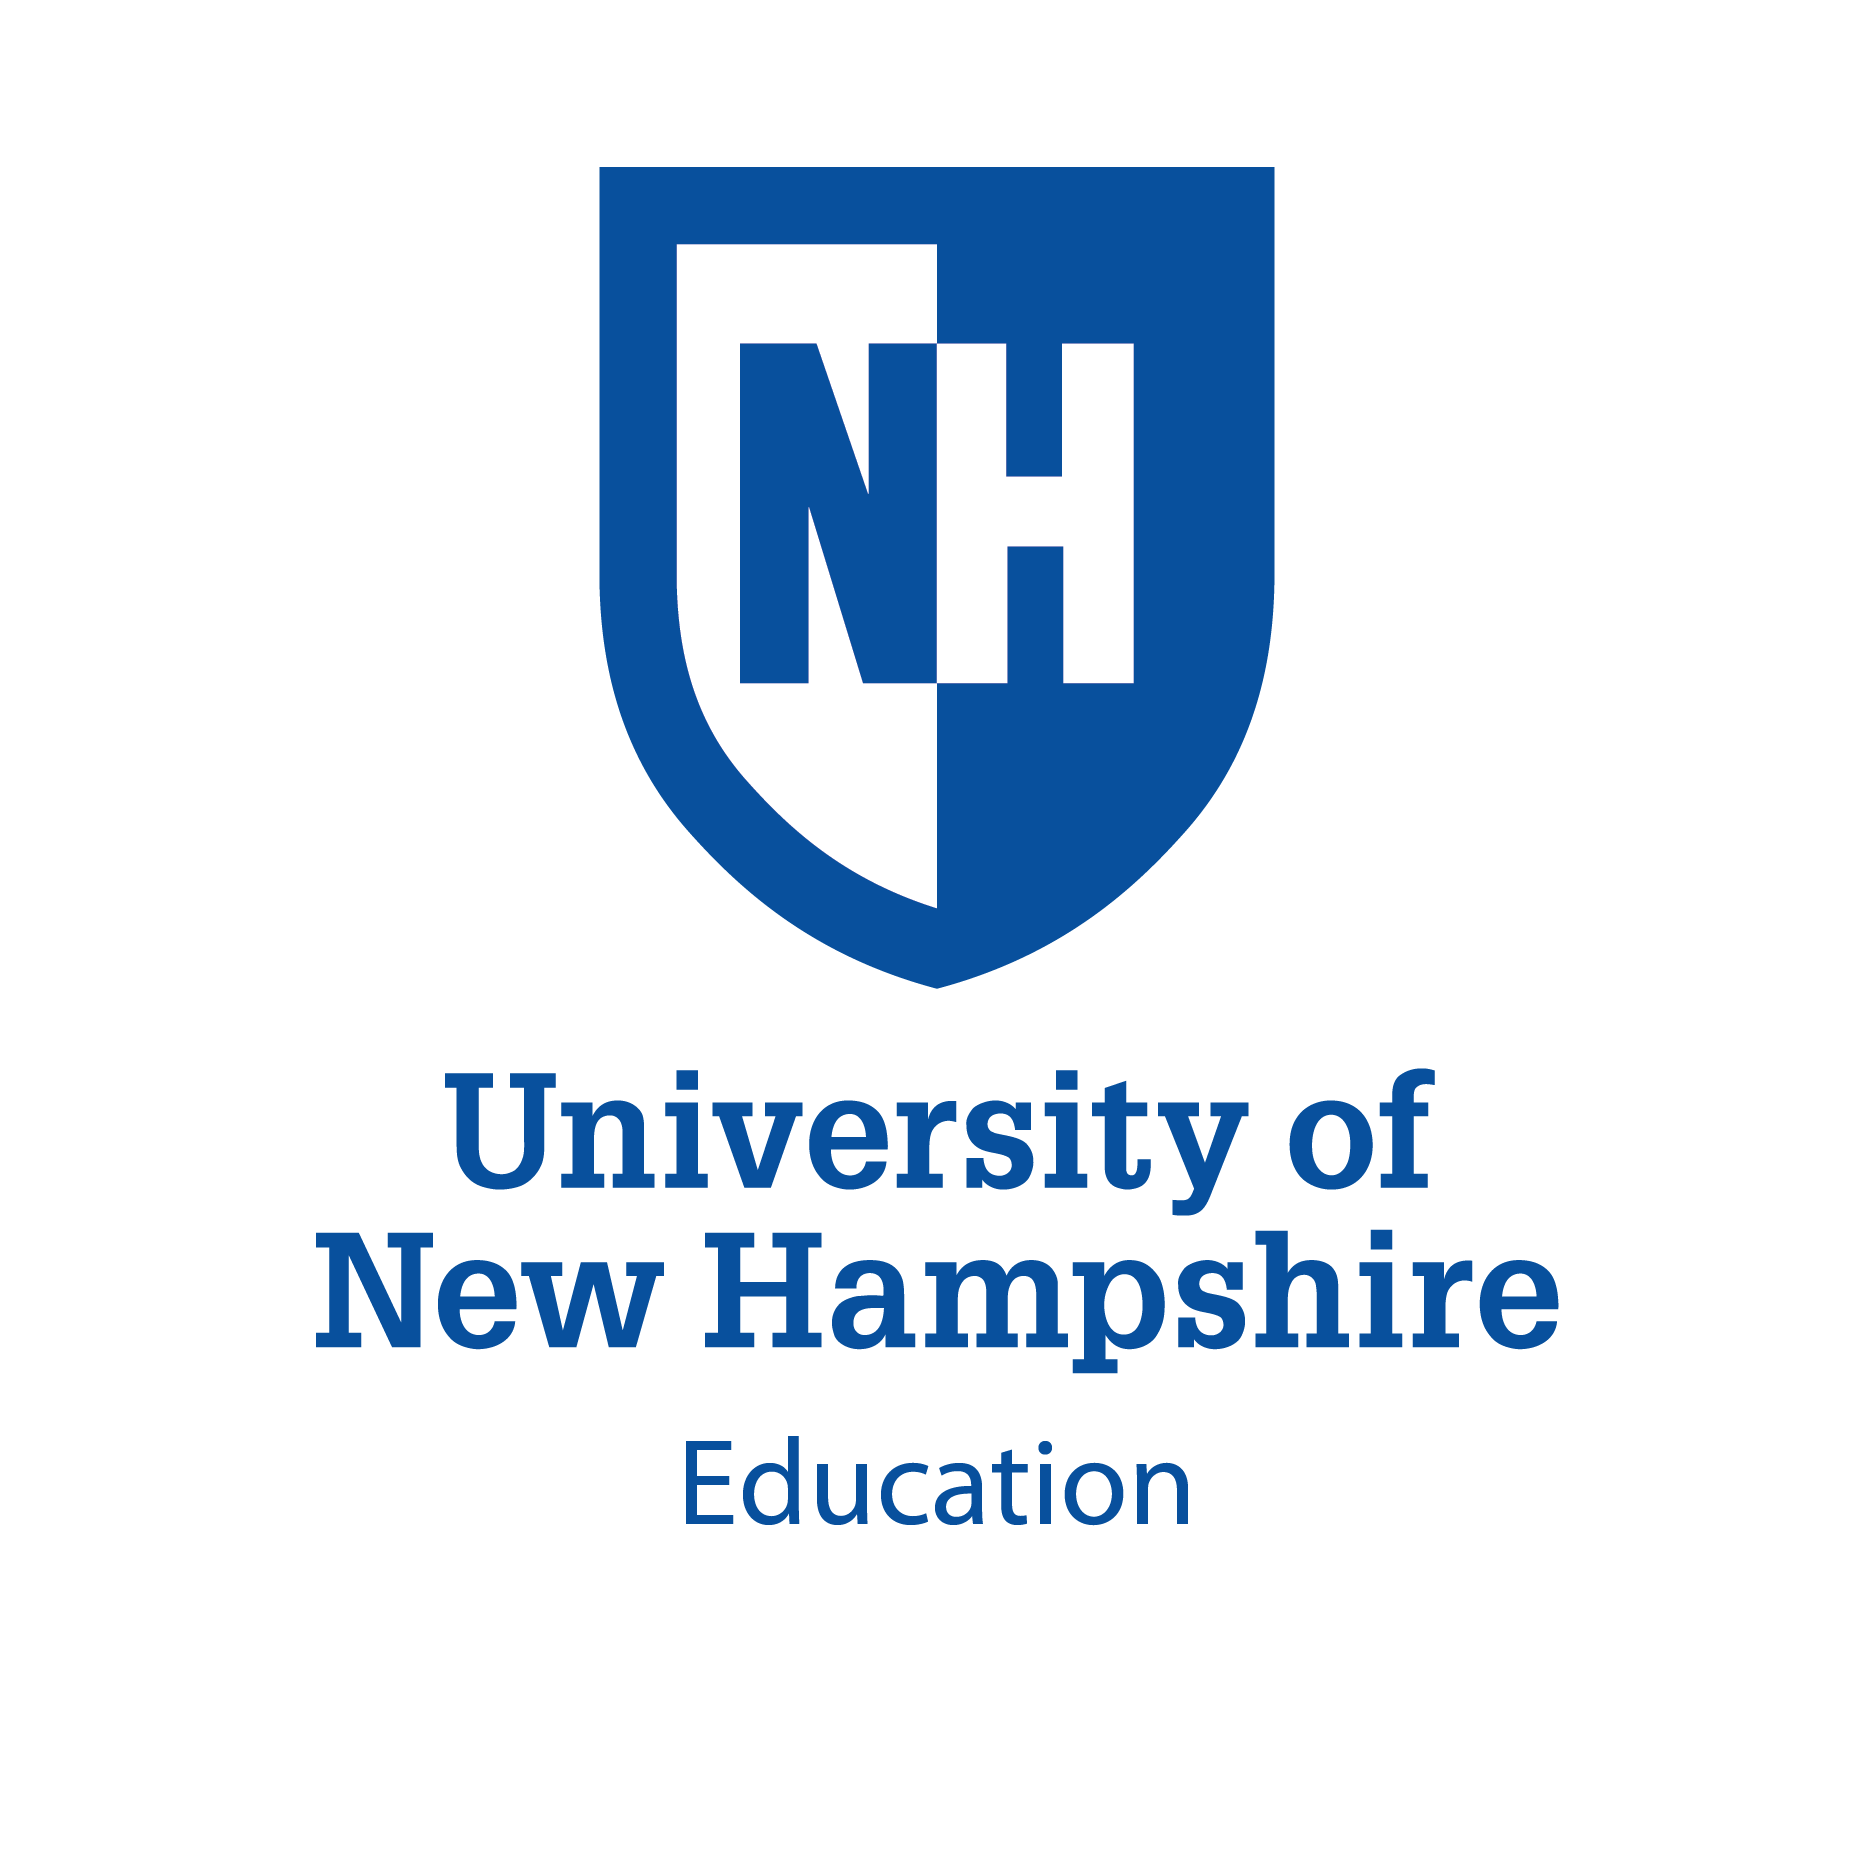 UNH_Education_CenterStacked_Blue CMYK_noR.png